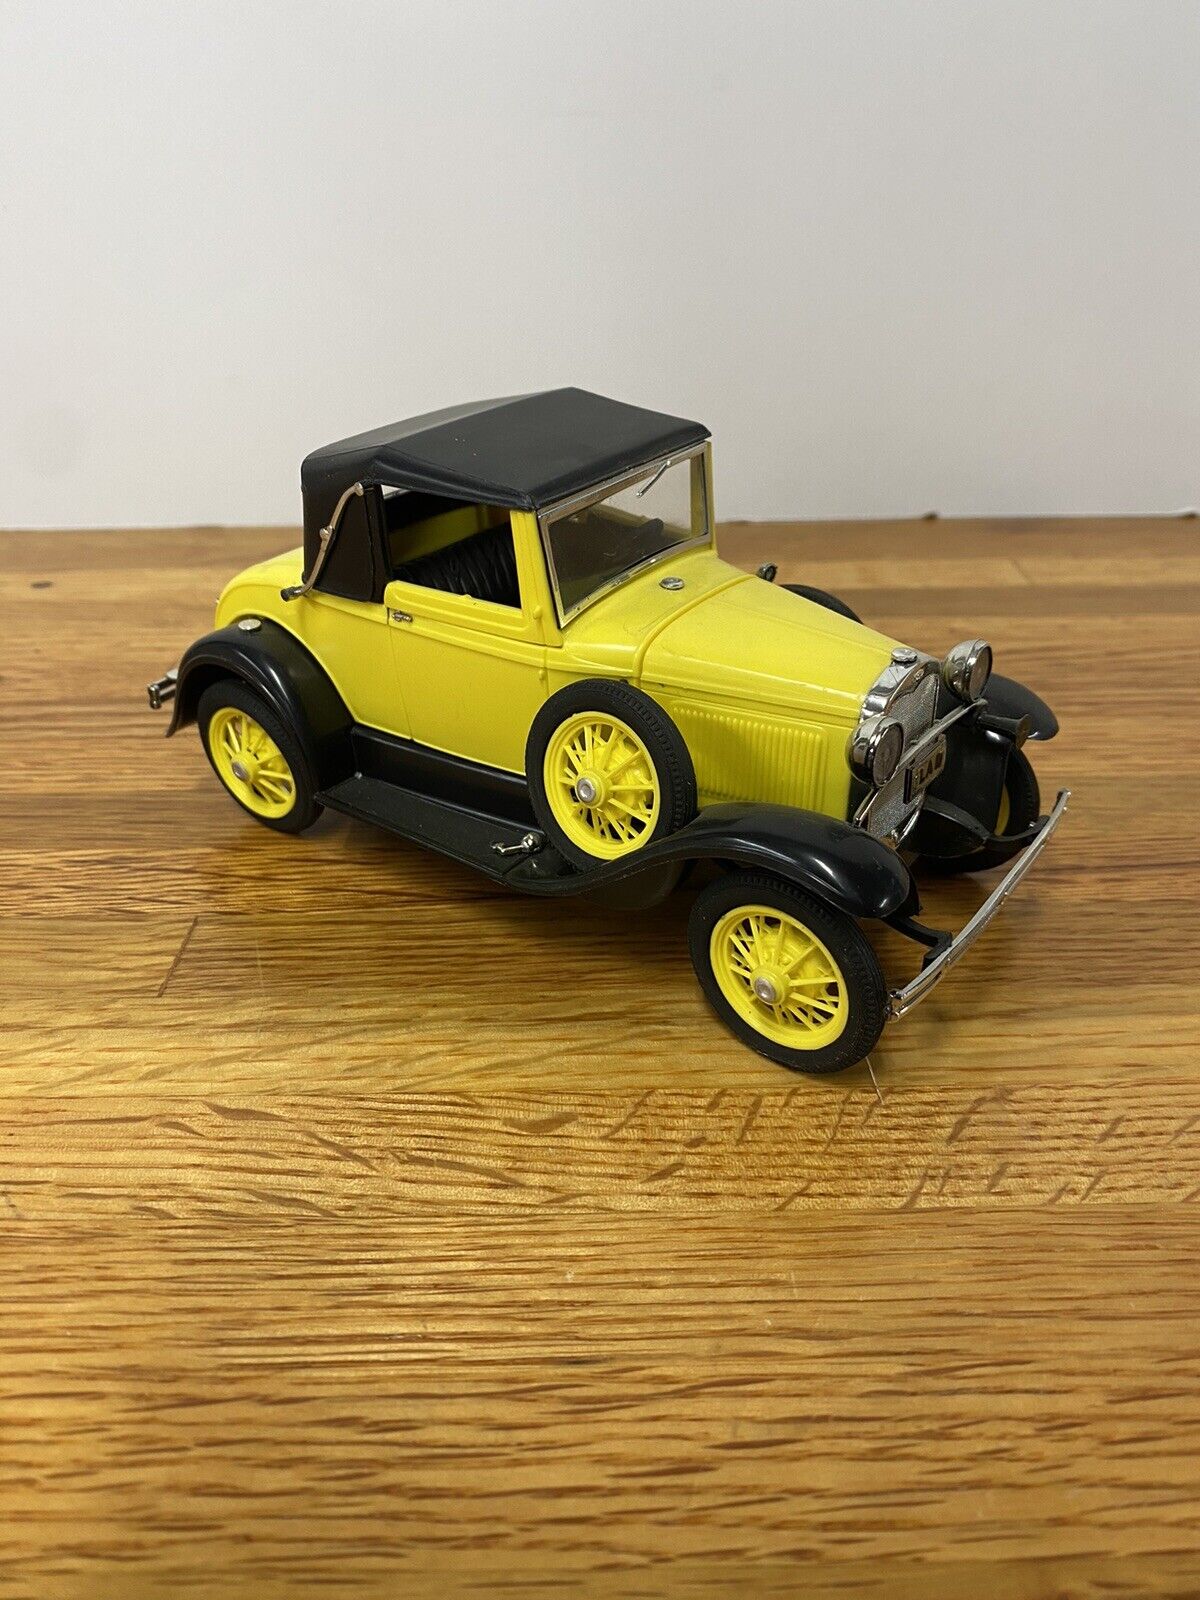 EARLY Monogram 1930 Ford Coupe/Convertible 1/25 th Model Kit-Completed Build